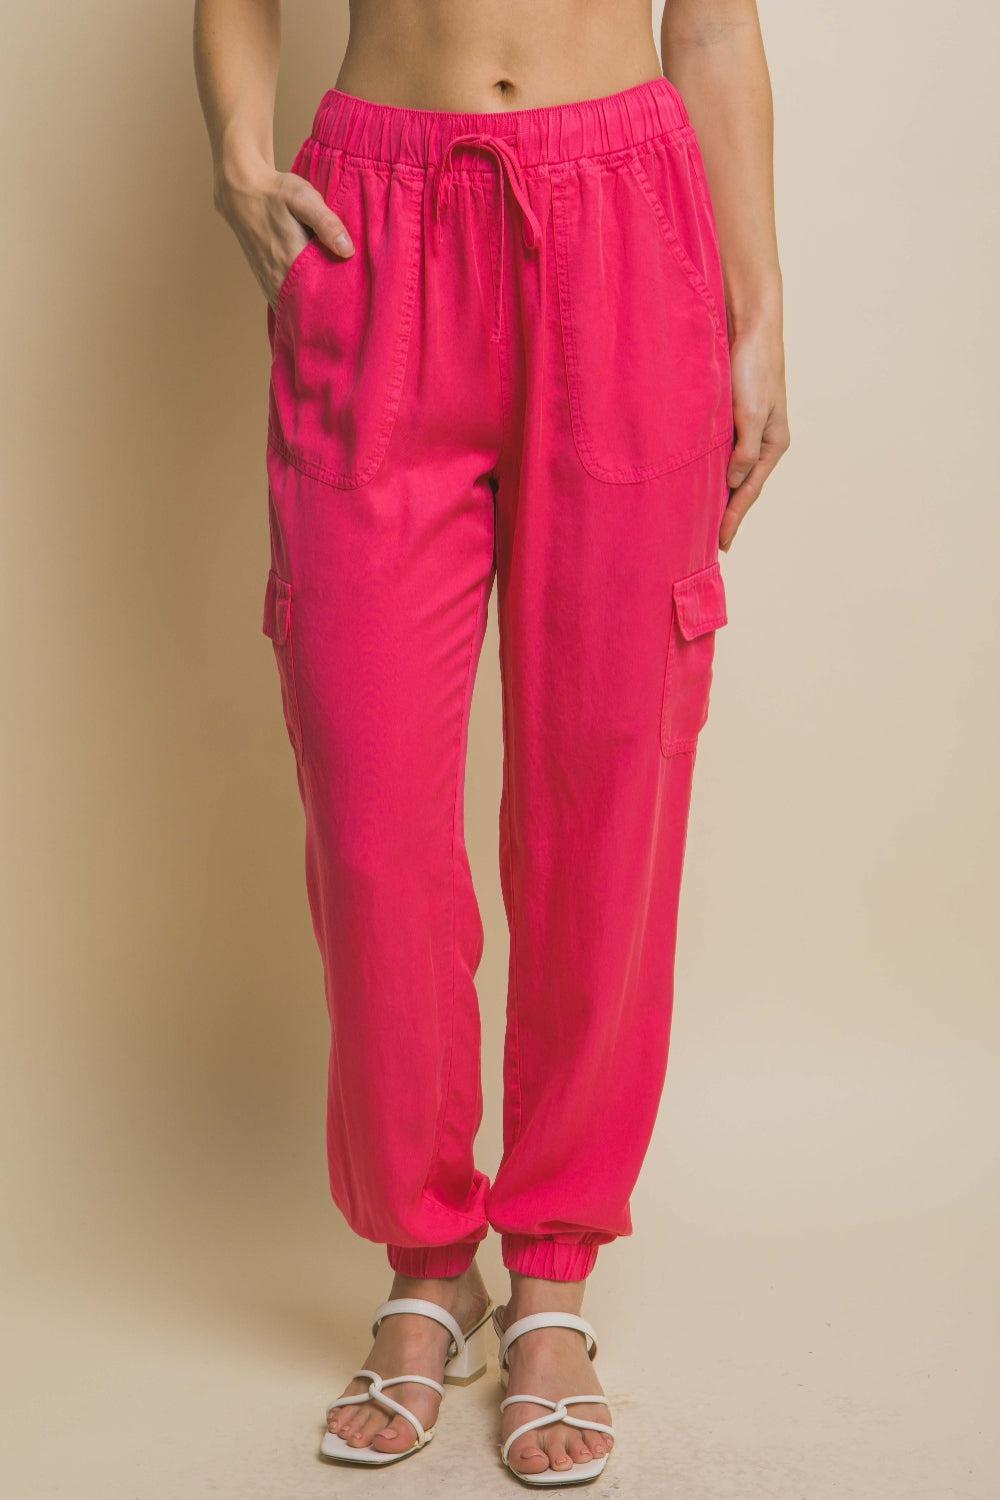 a woman wearing pink pants and sandals